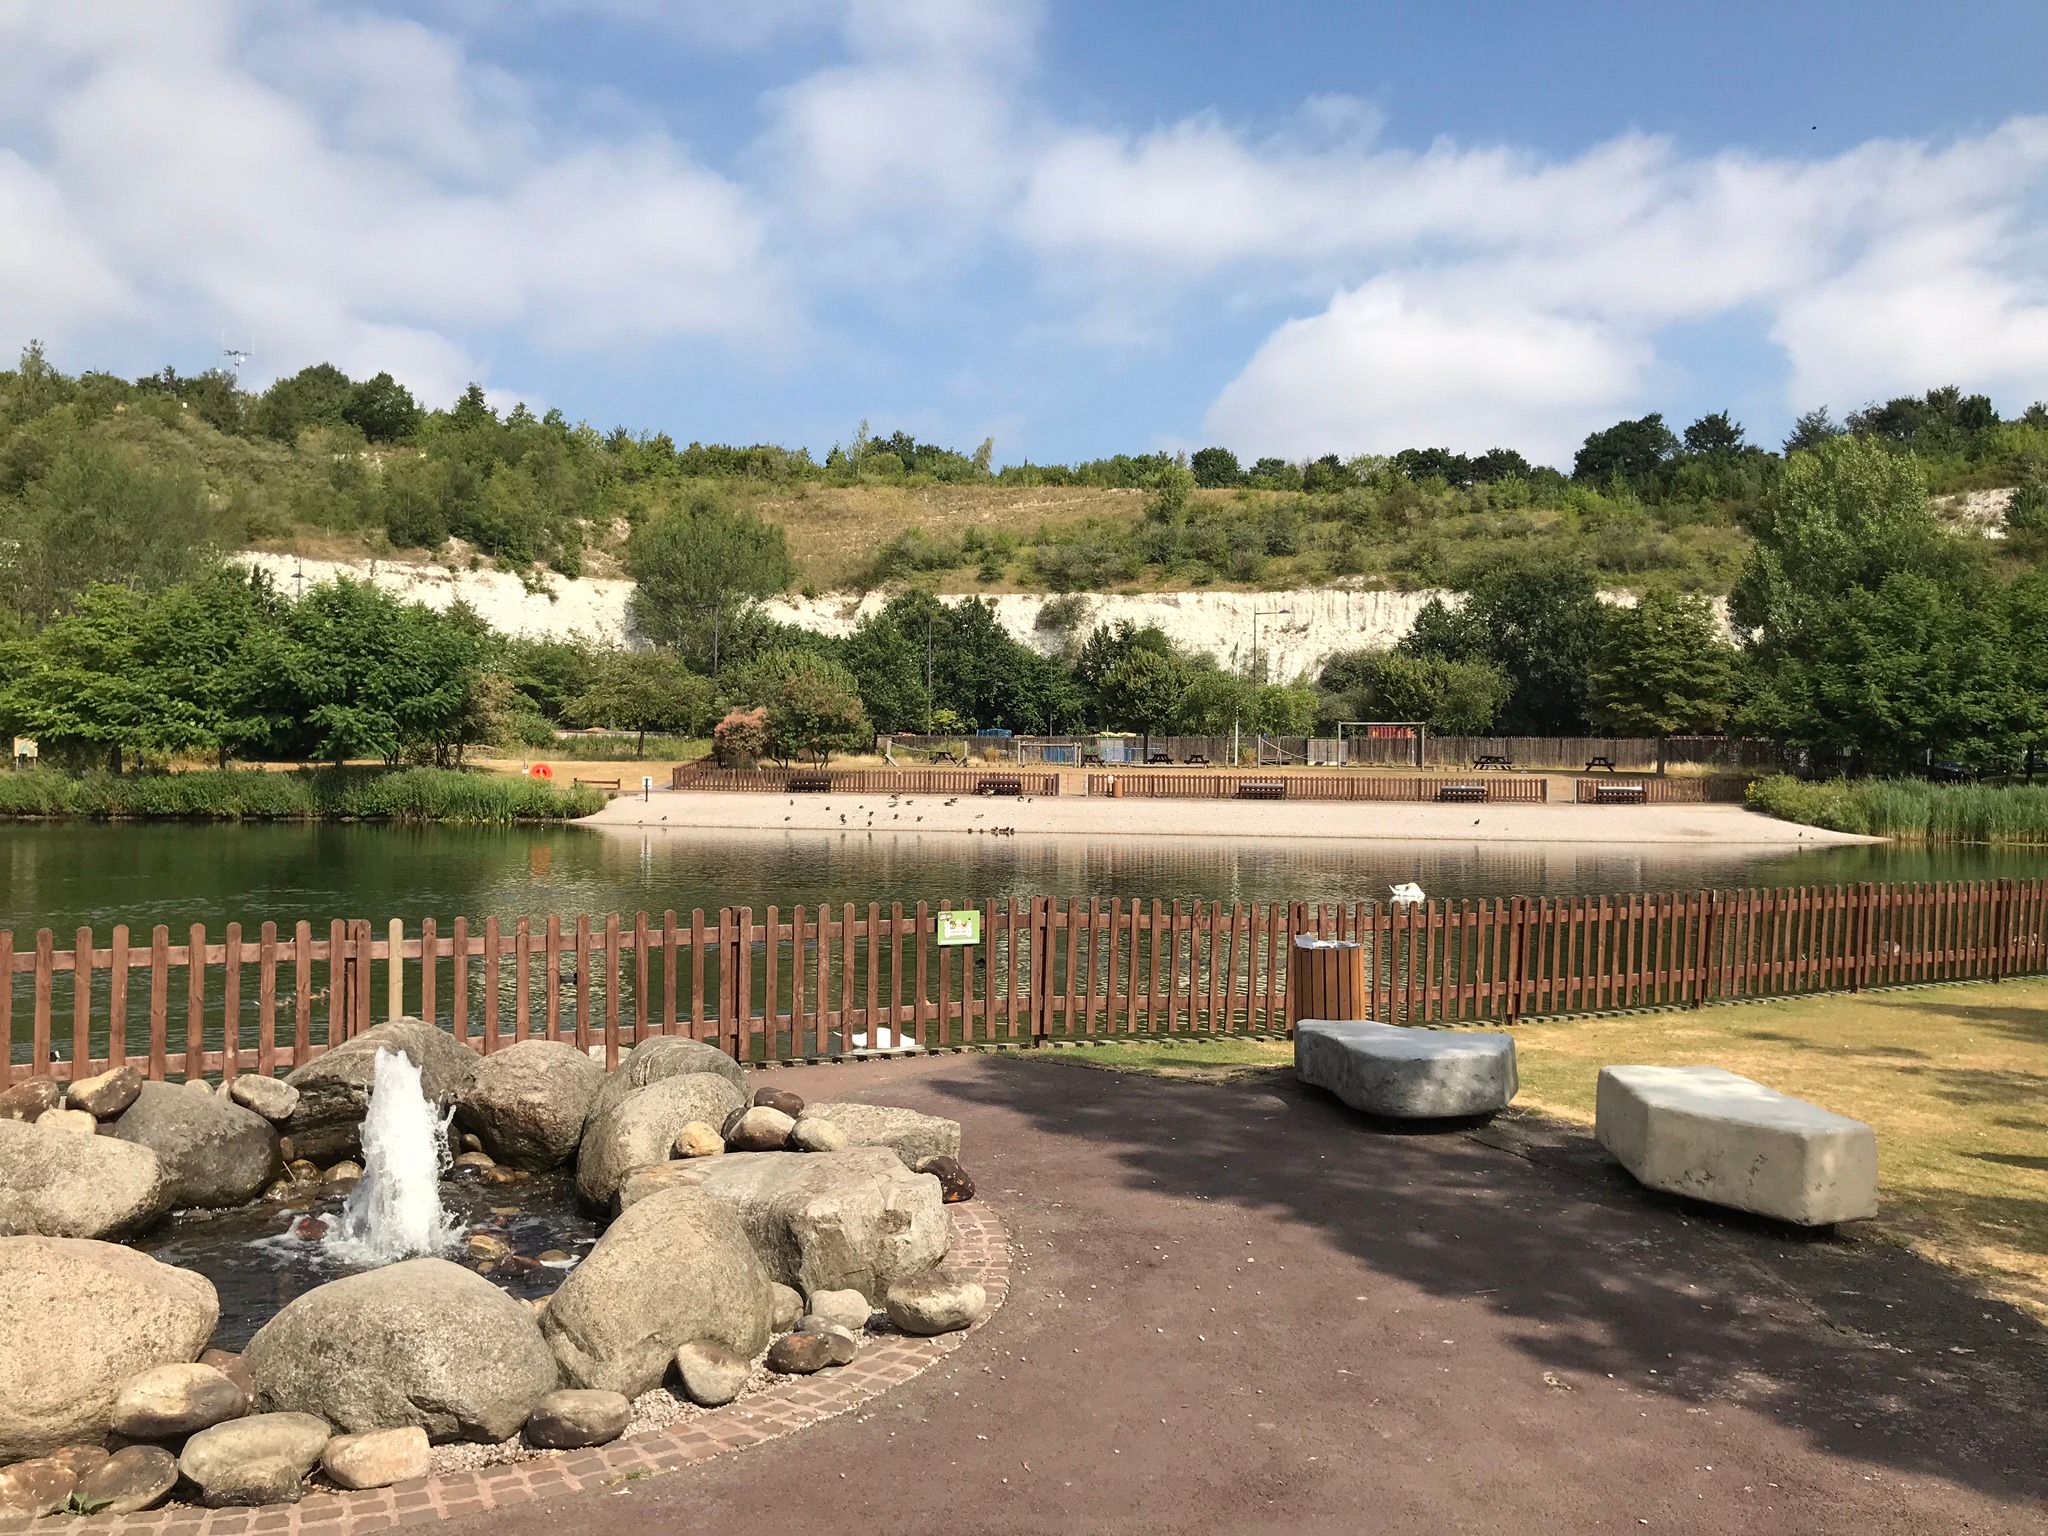 View as you enter Bluewater Nature Trail, the large lake in the foreground with chldren's assault course on the other side of the lake and white chalk cliffs in the distance.